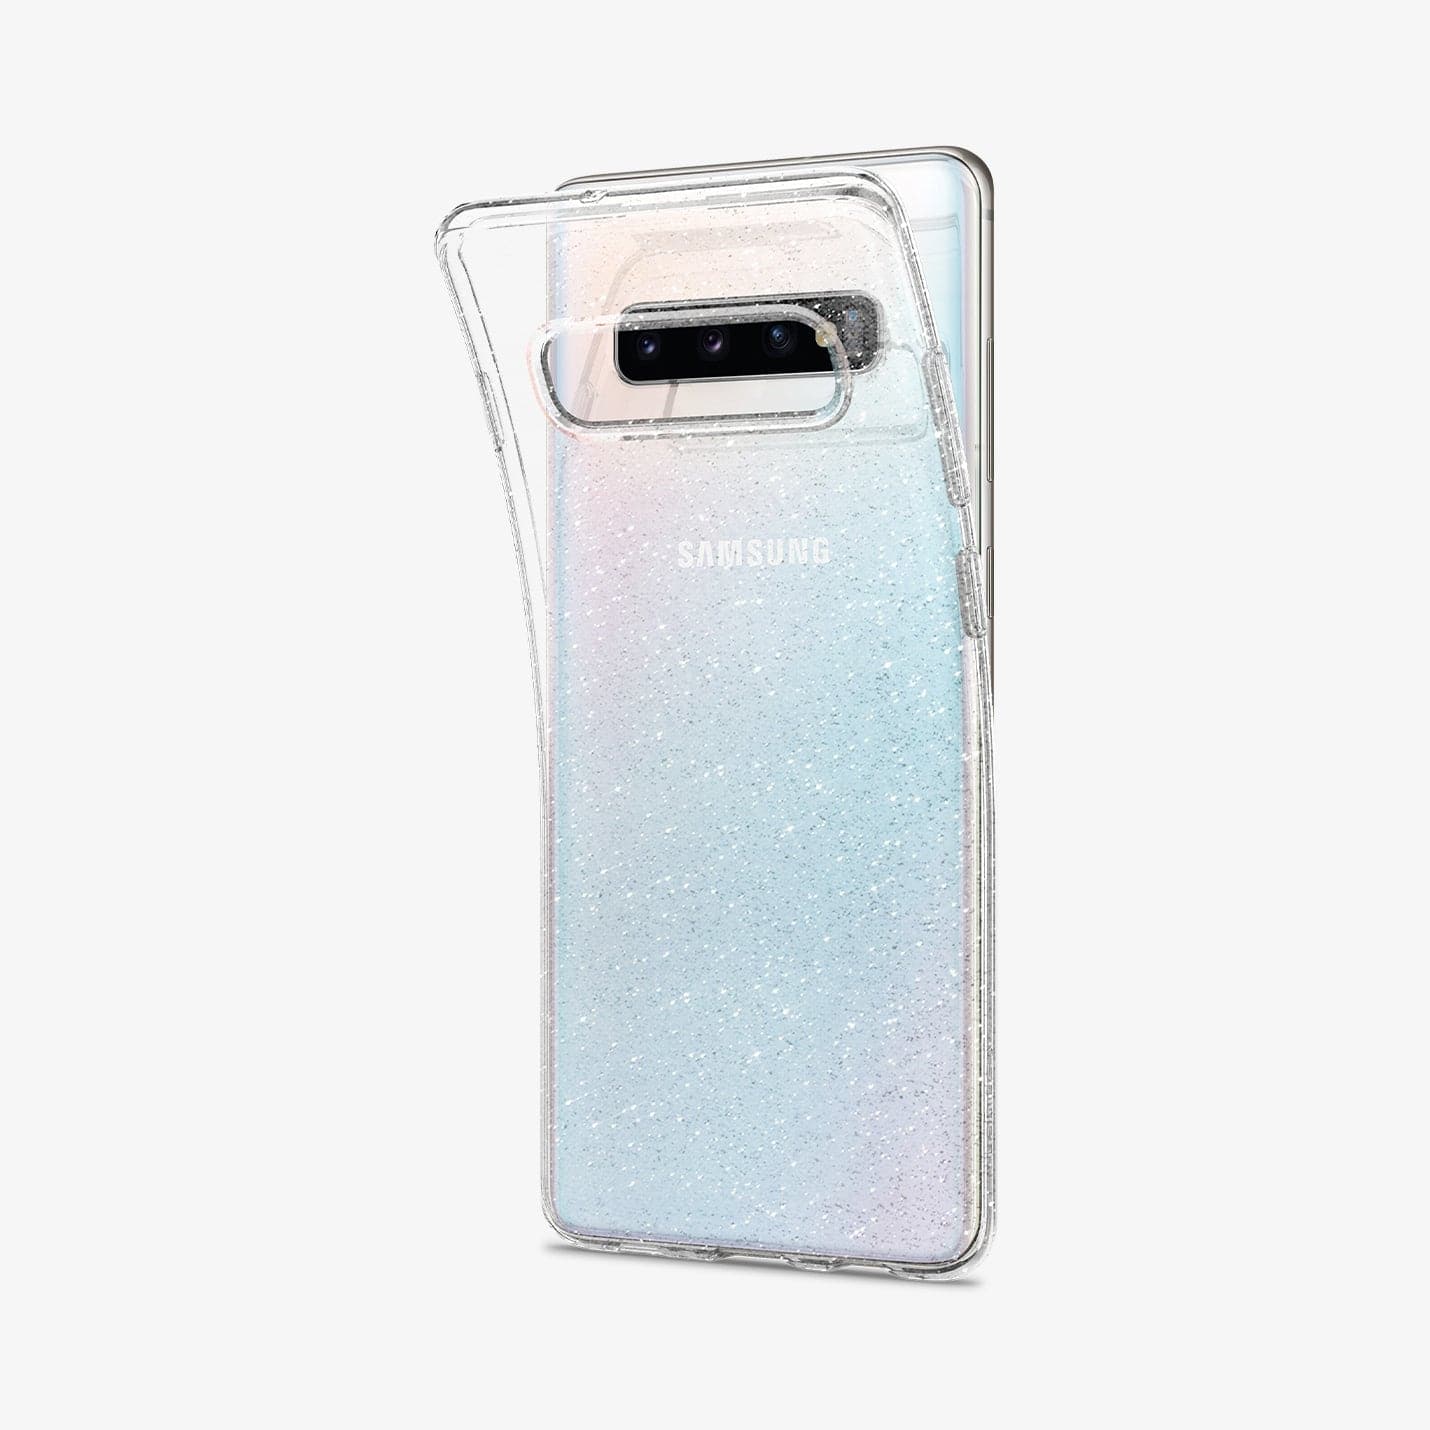 606CS25762 - Galaxy S10 Plus Liquid Crystal Glitter Case in crystal quartz showing the back with case bending away from the device